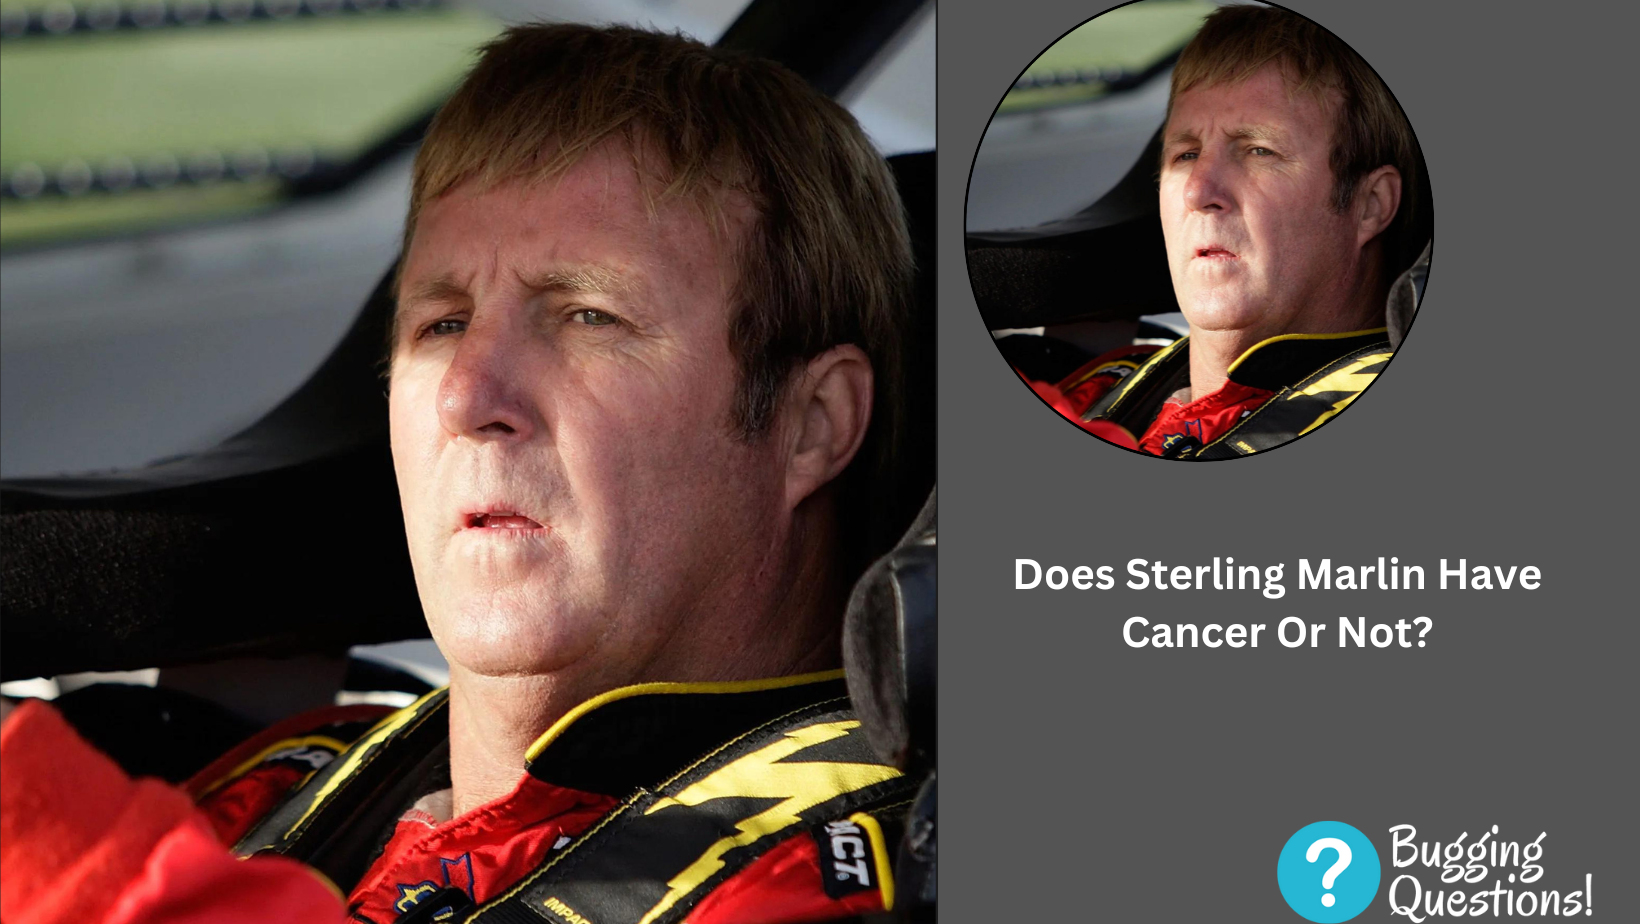 Does Sterling Marlin Have Cancer Or Not?